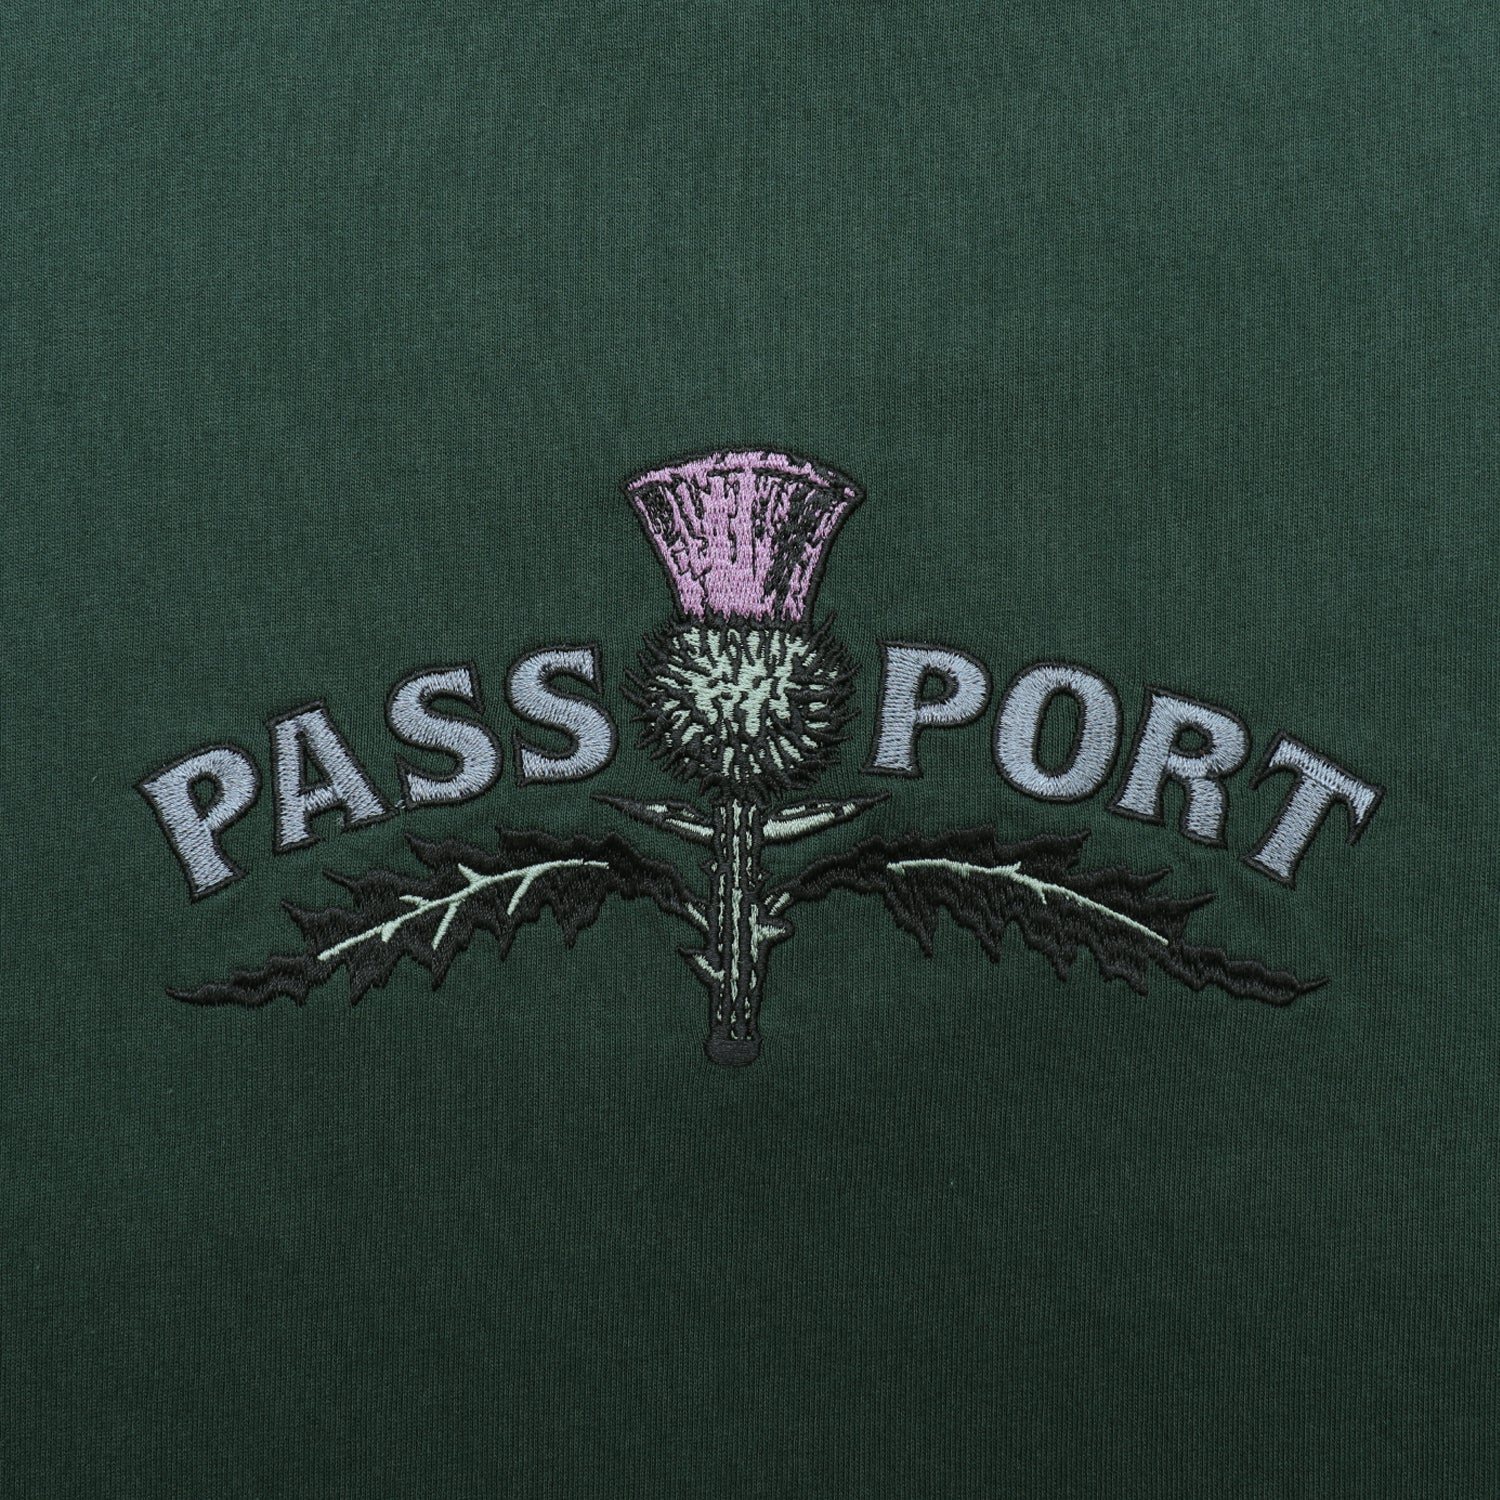 Pass~Port Thistle Embroidery Tee - Forest Green